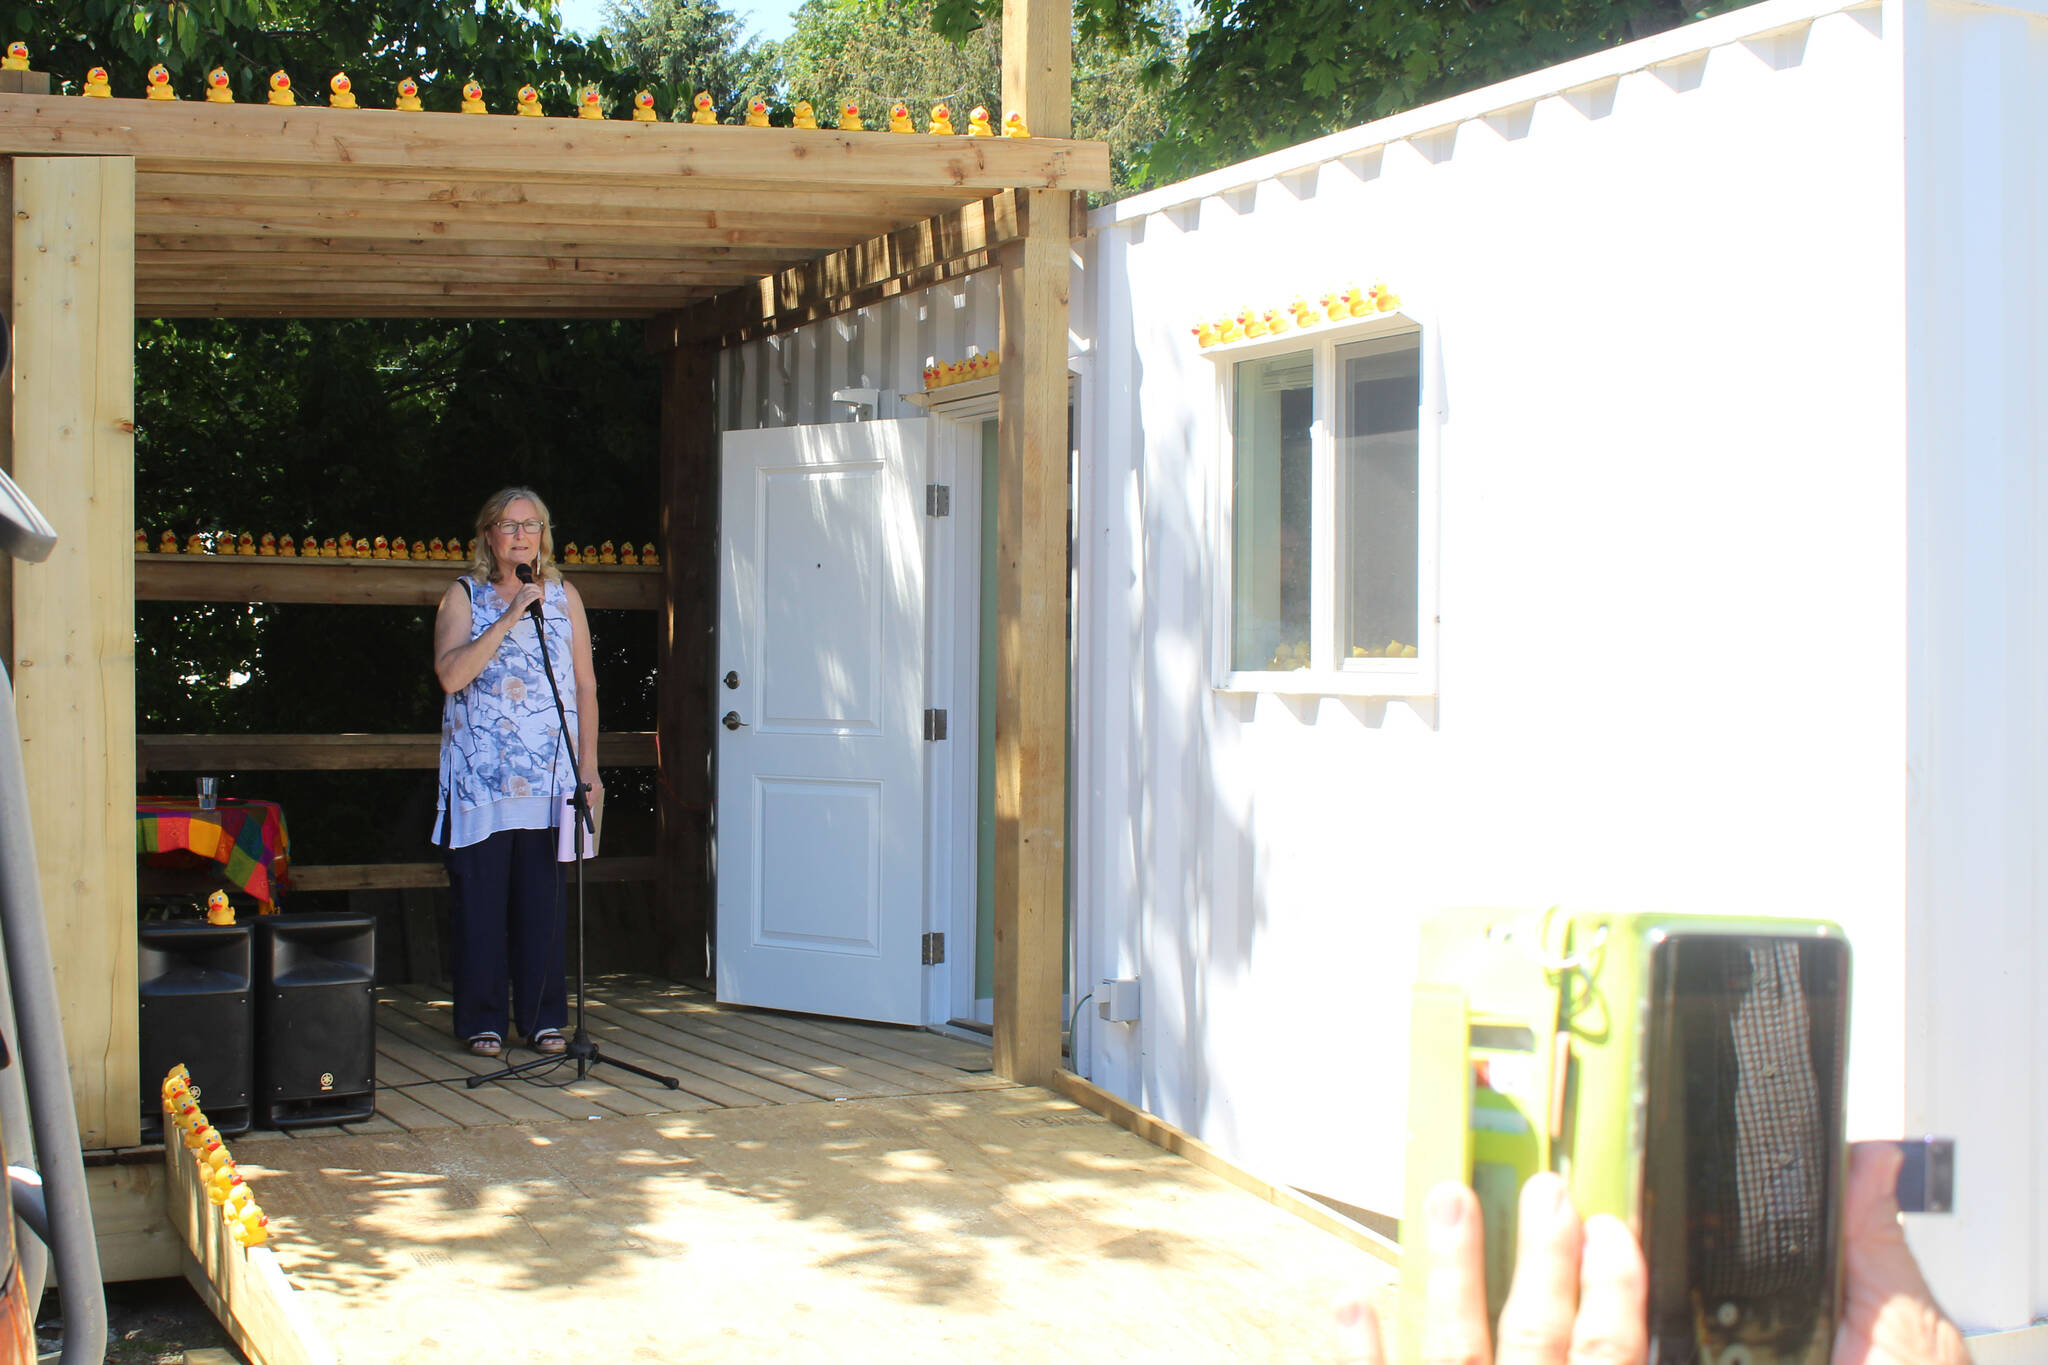 Photo by Terry Farrell
Charlene Davis of Comox Rotary, British Columbia, introduces a shipping container home on June 7, 2020, at the Maple Pool Campground in Courtenay, British Columbia.